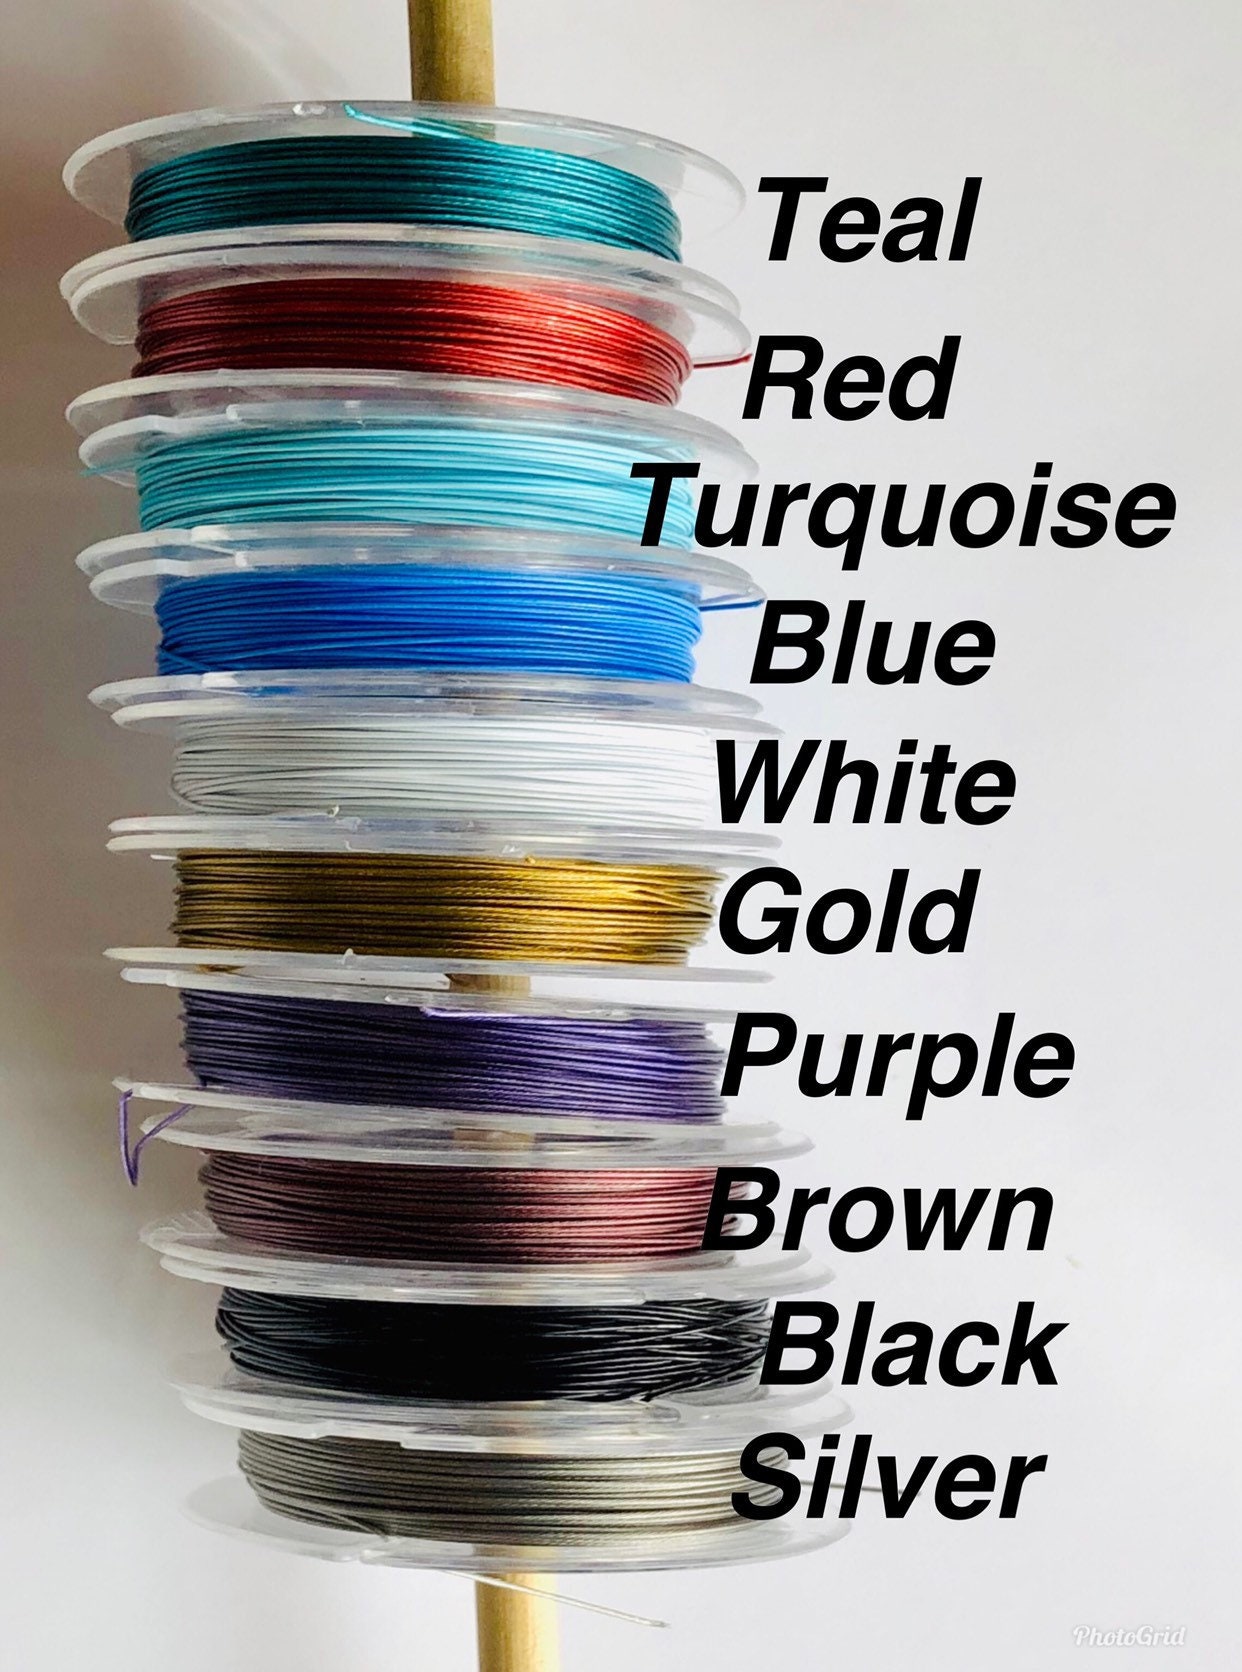 Tigertail beading wire, diameter 0.38mm, 10 colours of 10m spools.